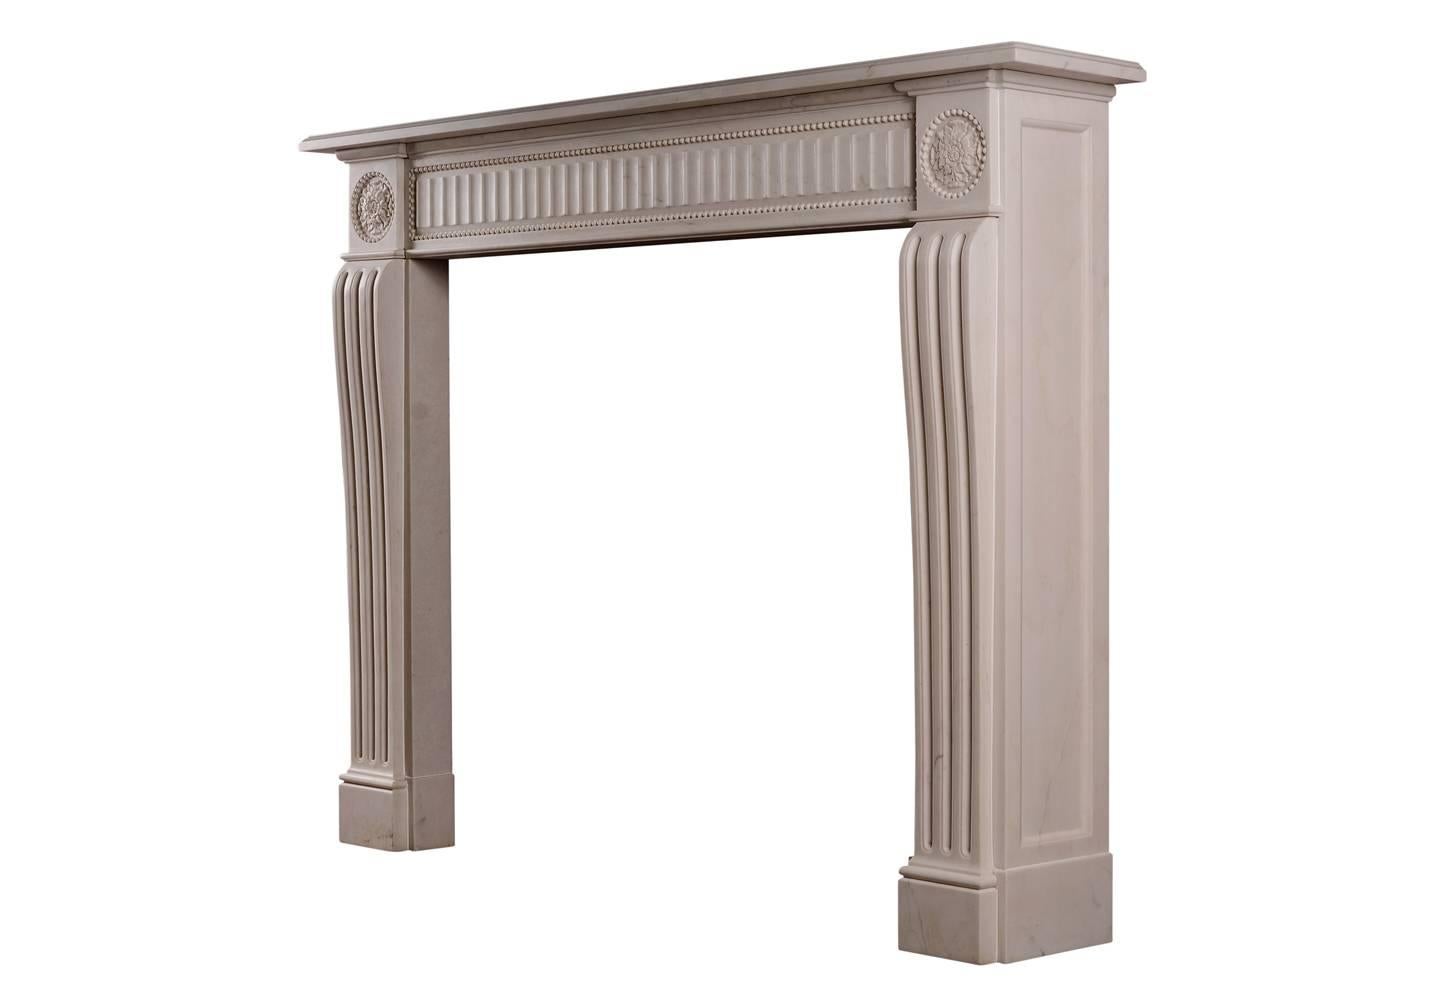 20th Century English White Marble Fireplace in the Regency Style For Sale